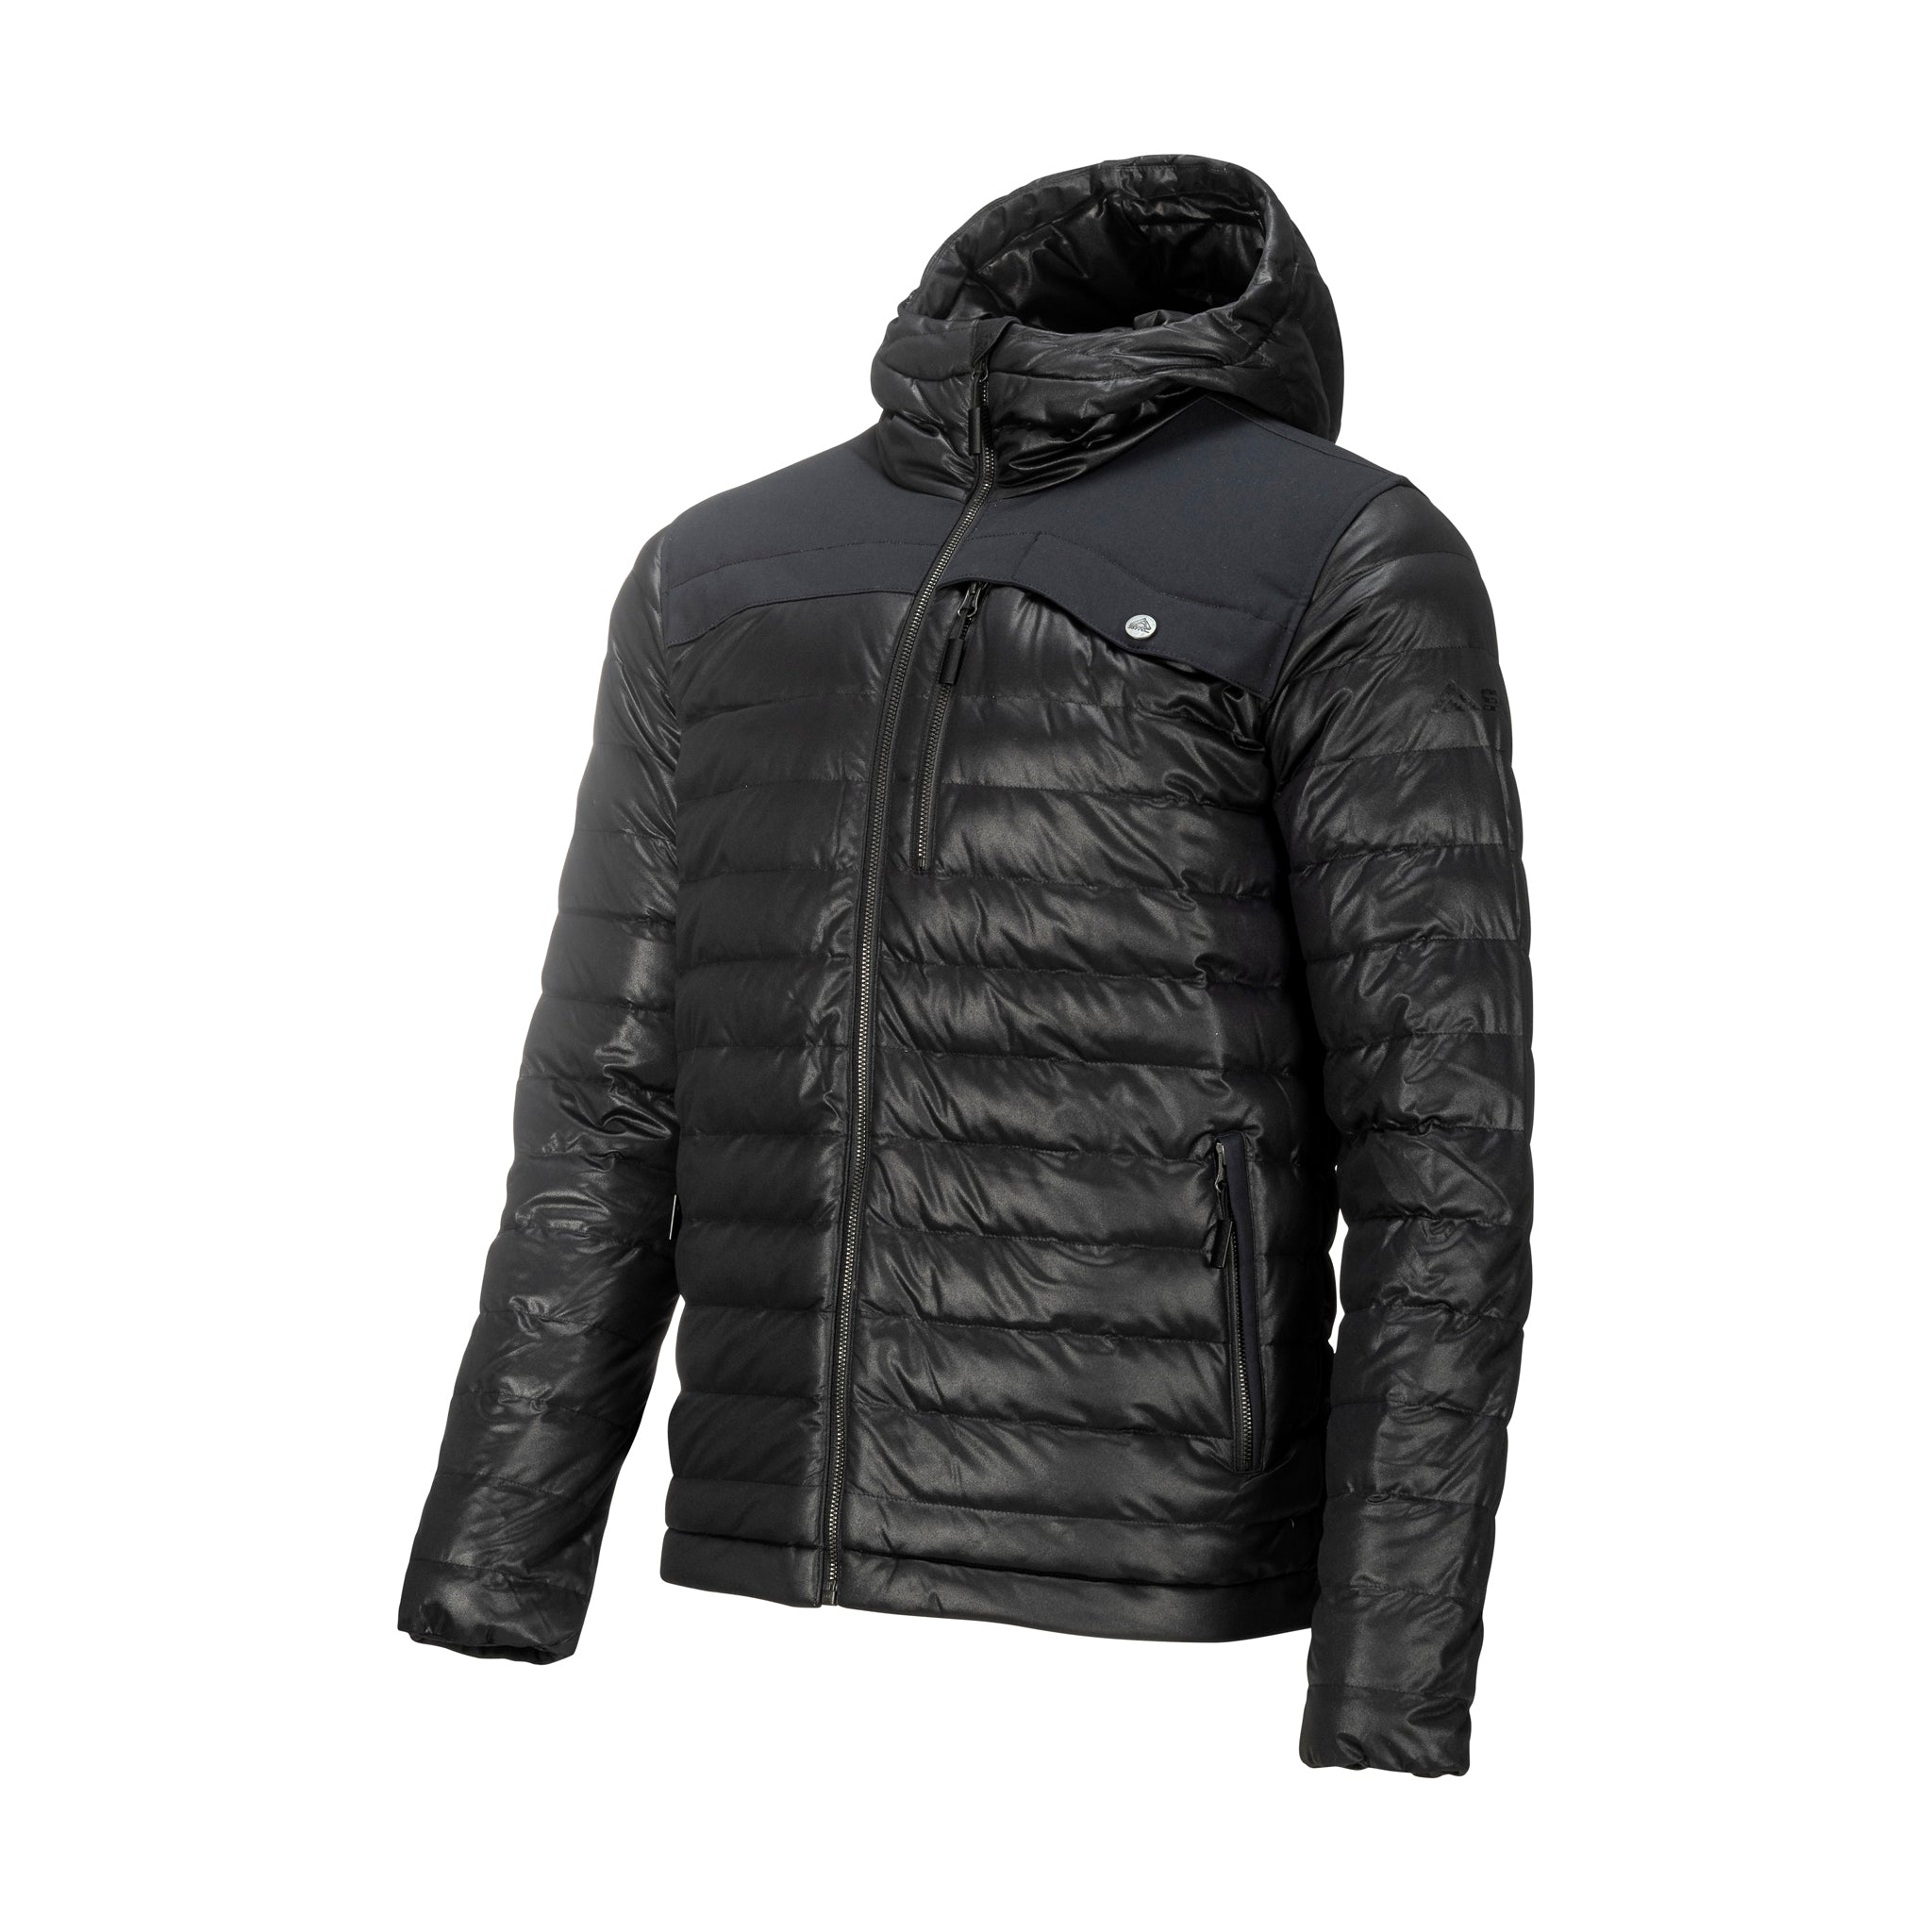 Men's Stretch Puffy Jacket | Insulated Puffy Jacket | SYNC